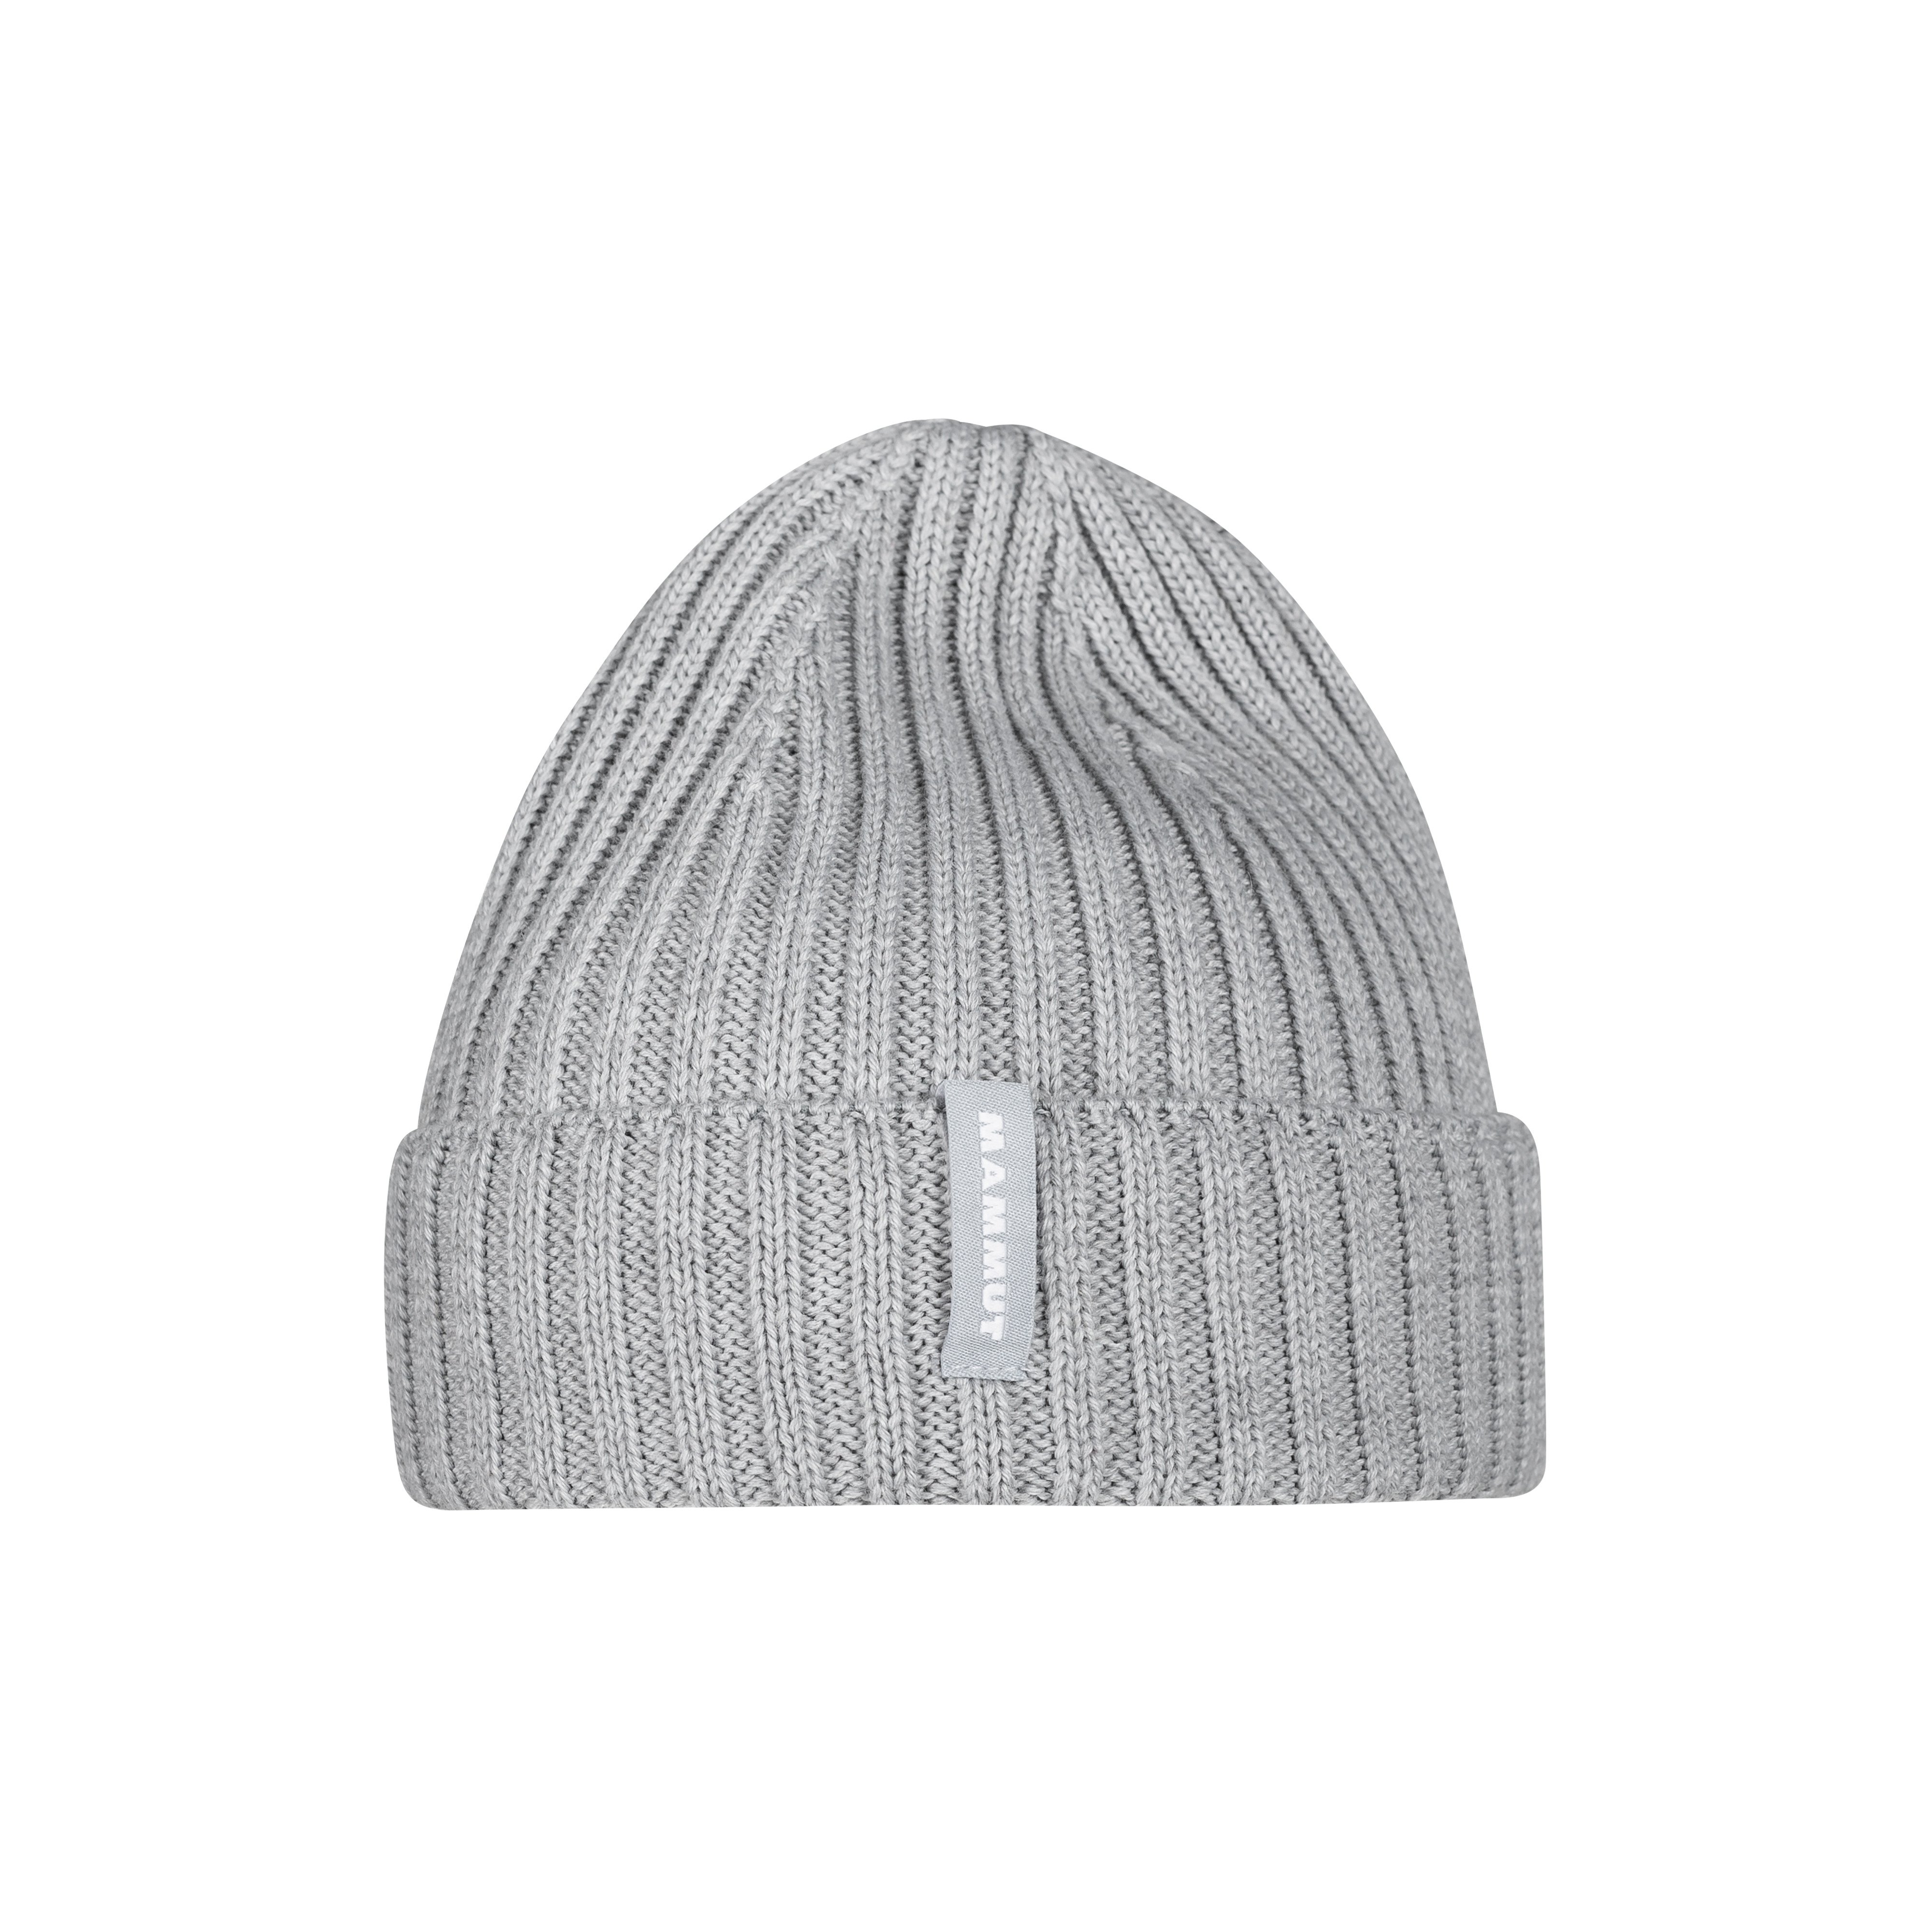 Alvra Beanie - highway, one size product image